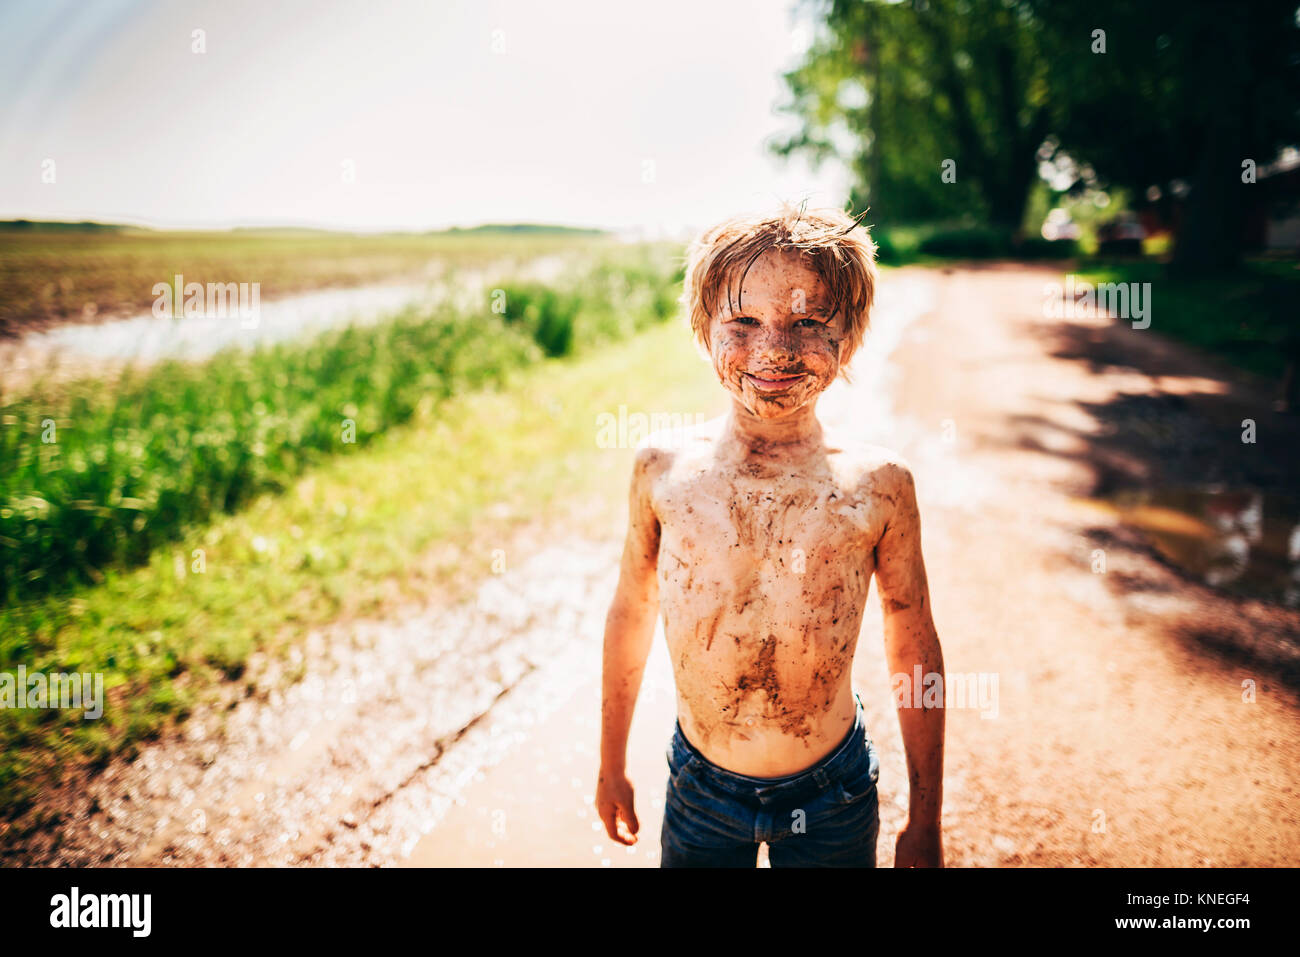 Portrait of boy standing outside covered in dirt Stock Photo - Alamy